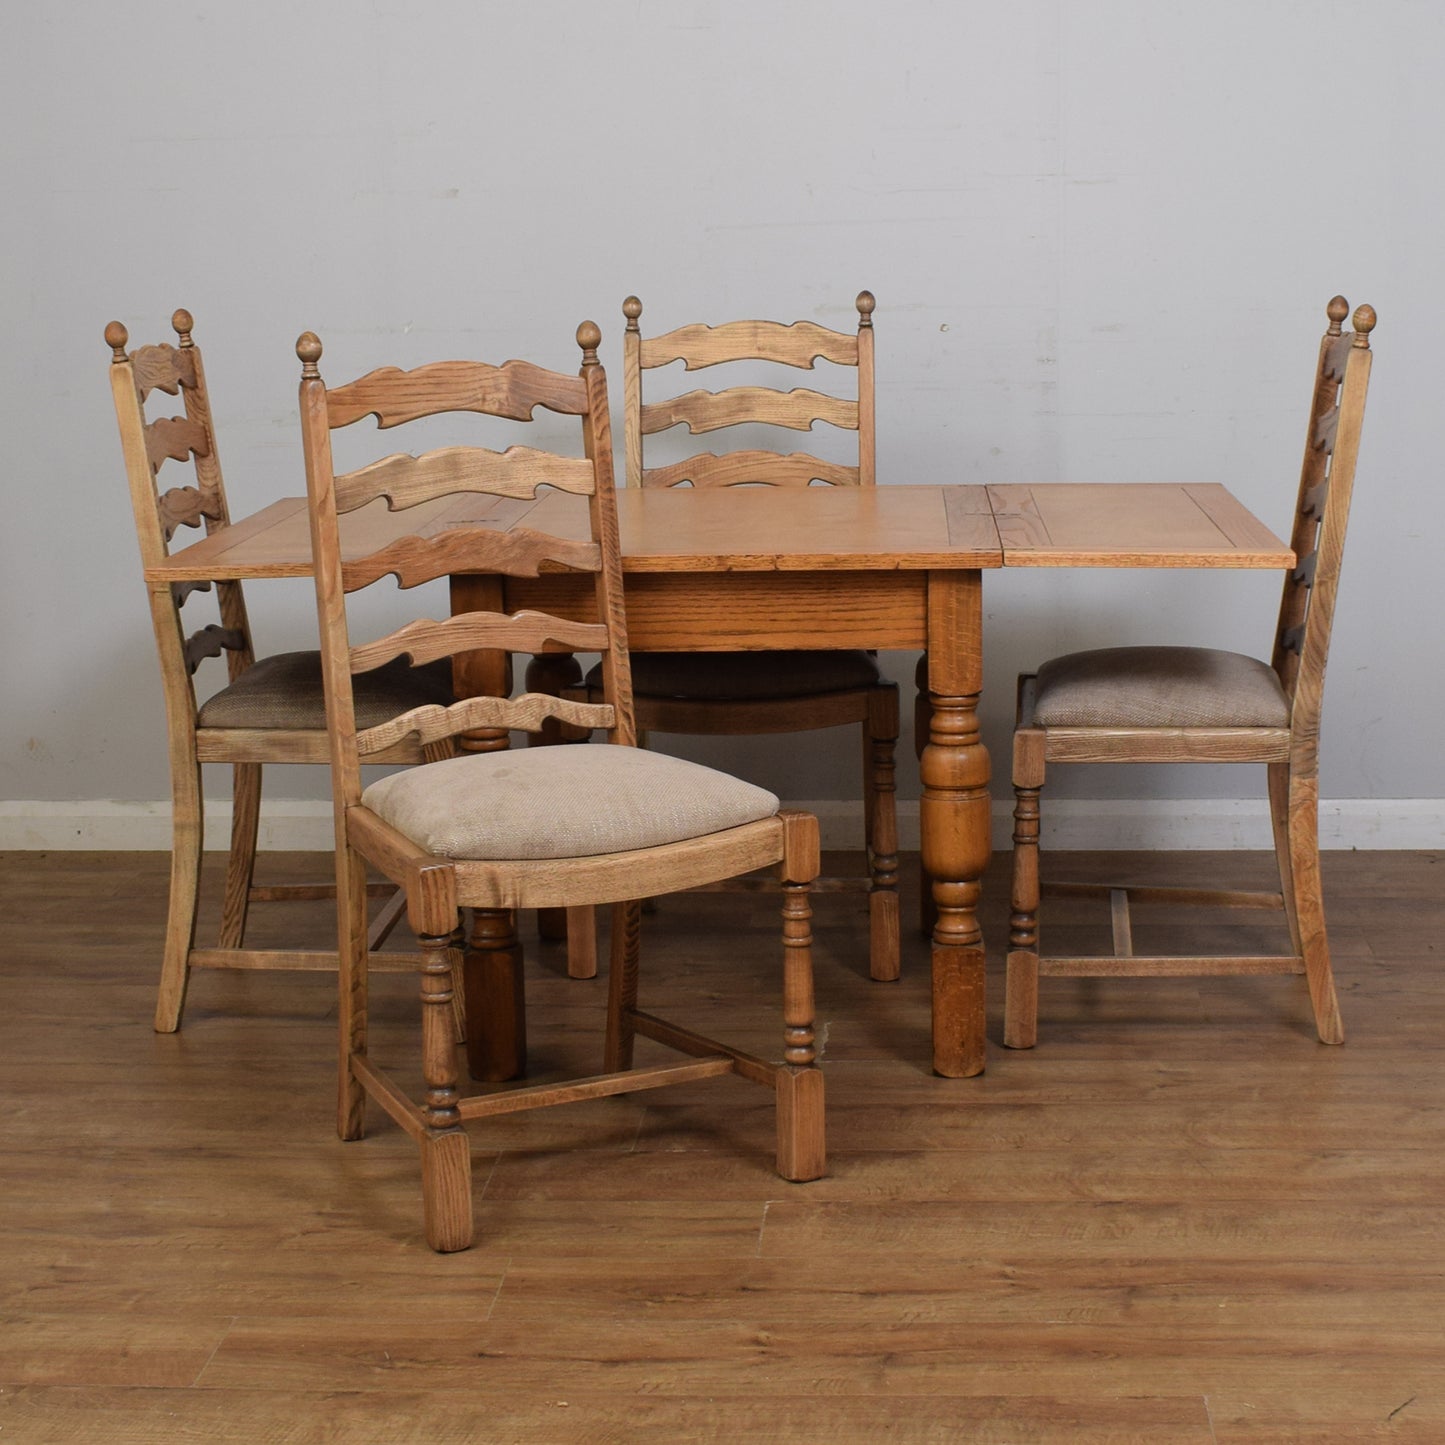 Extending Vintage Folding Table and Four Chairs